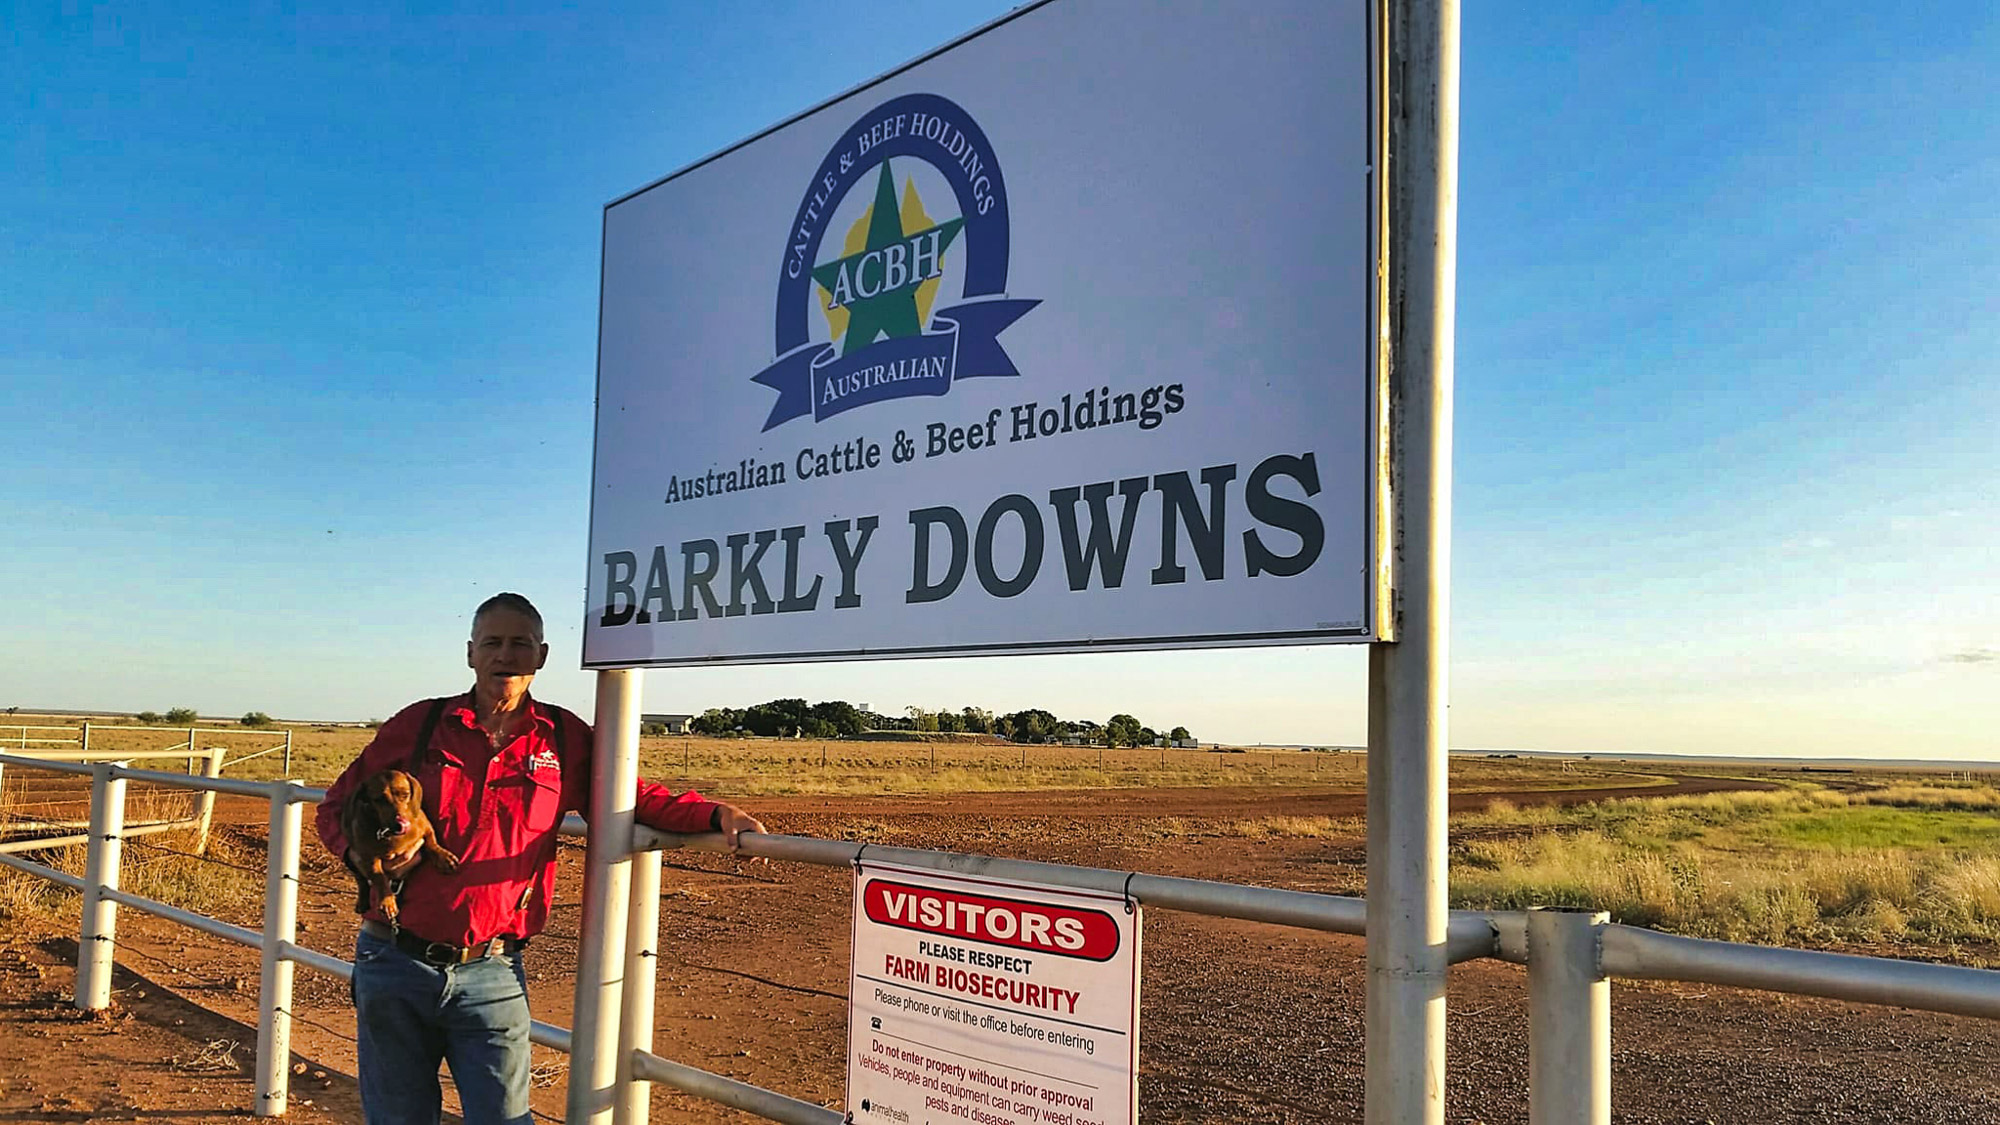 Out walking at Barkly Downs Station, Qld. 2